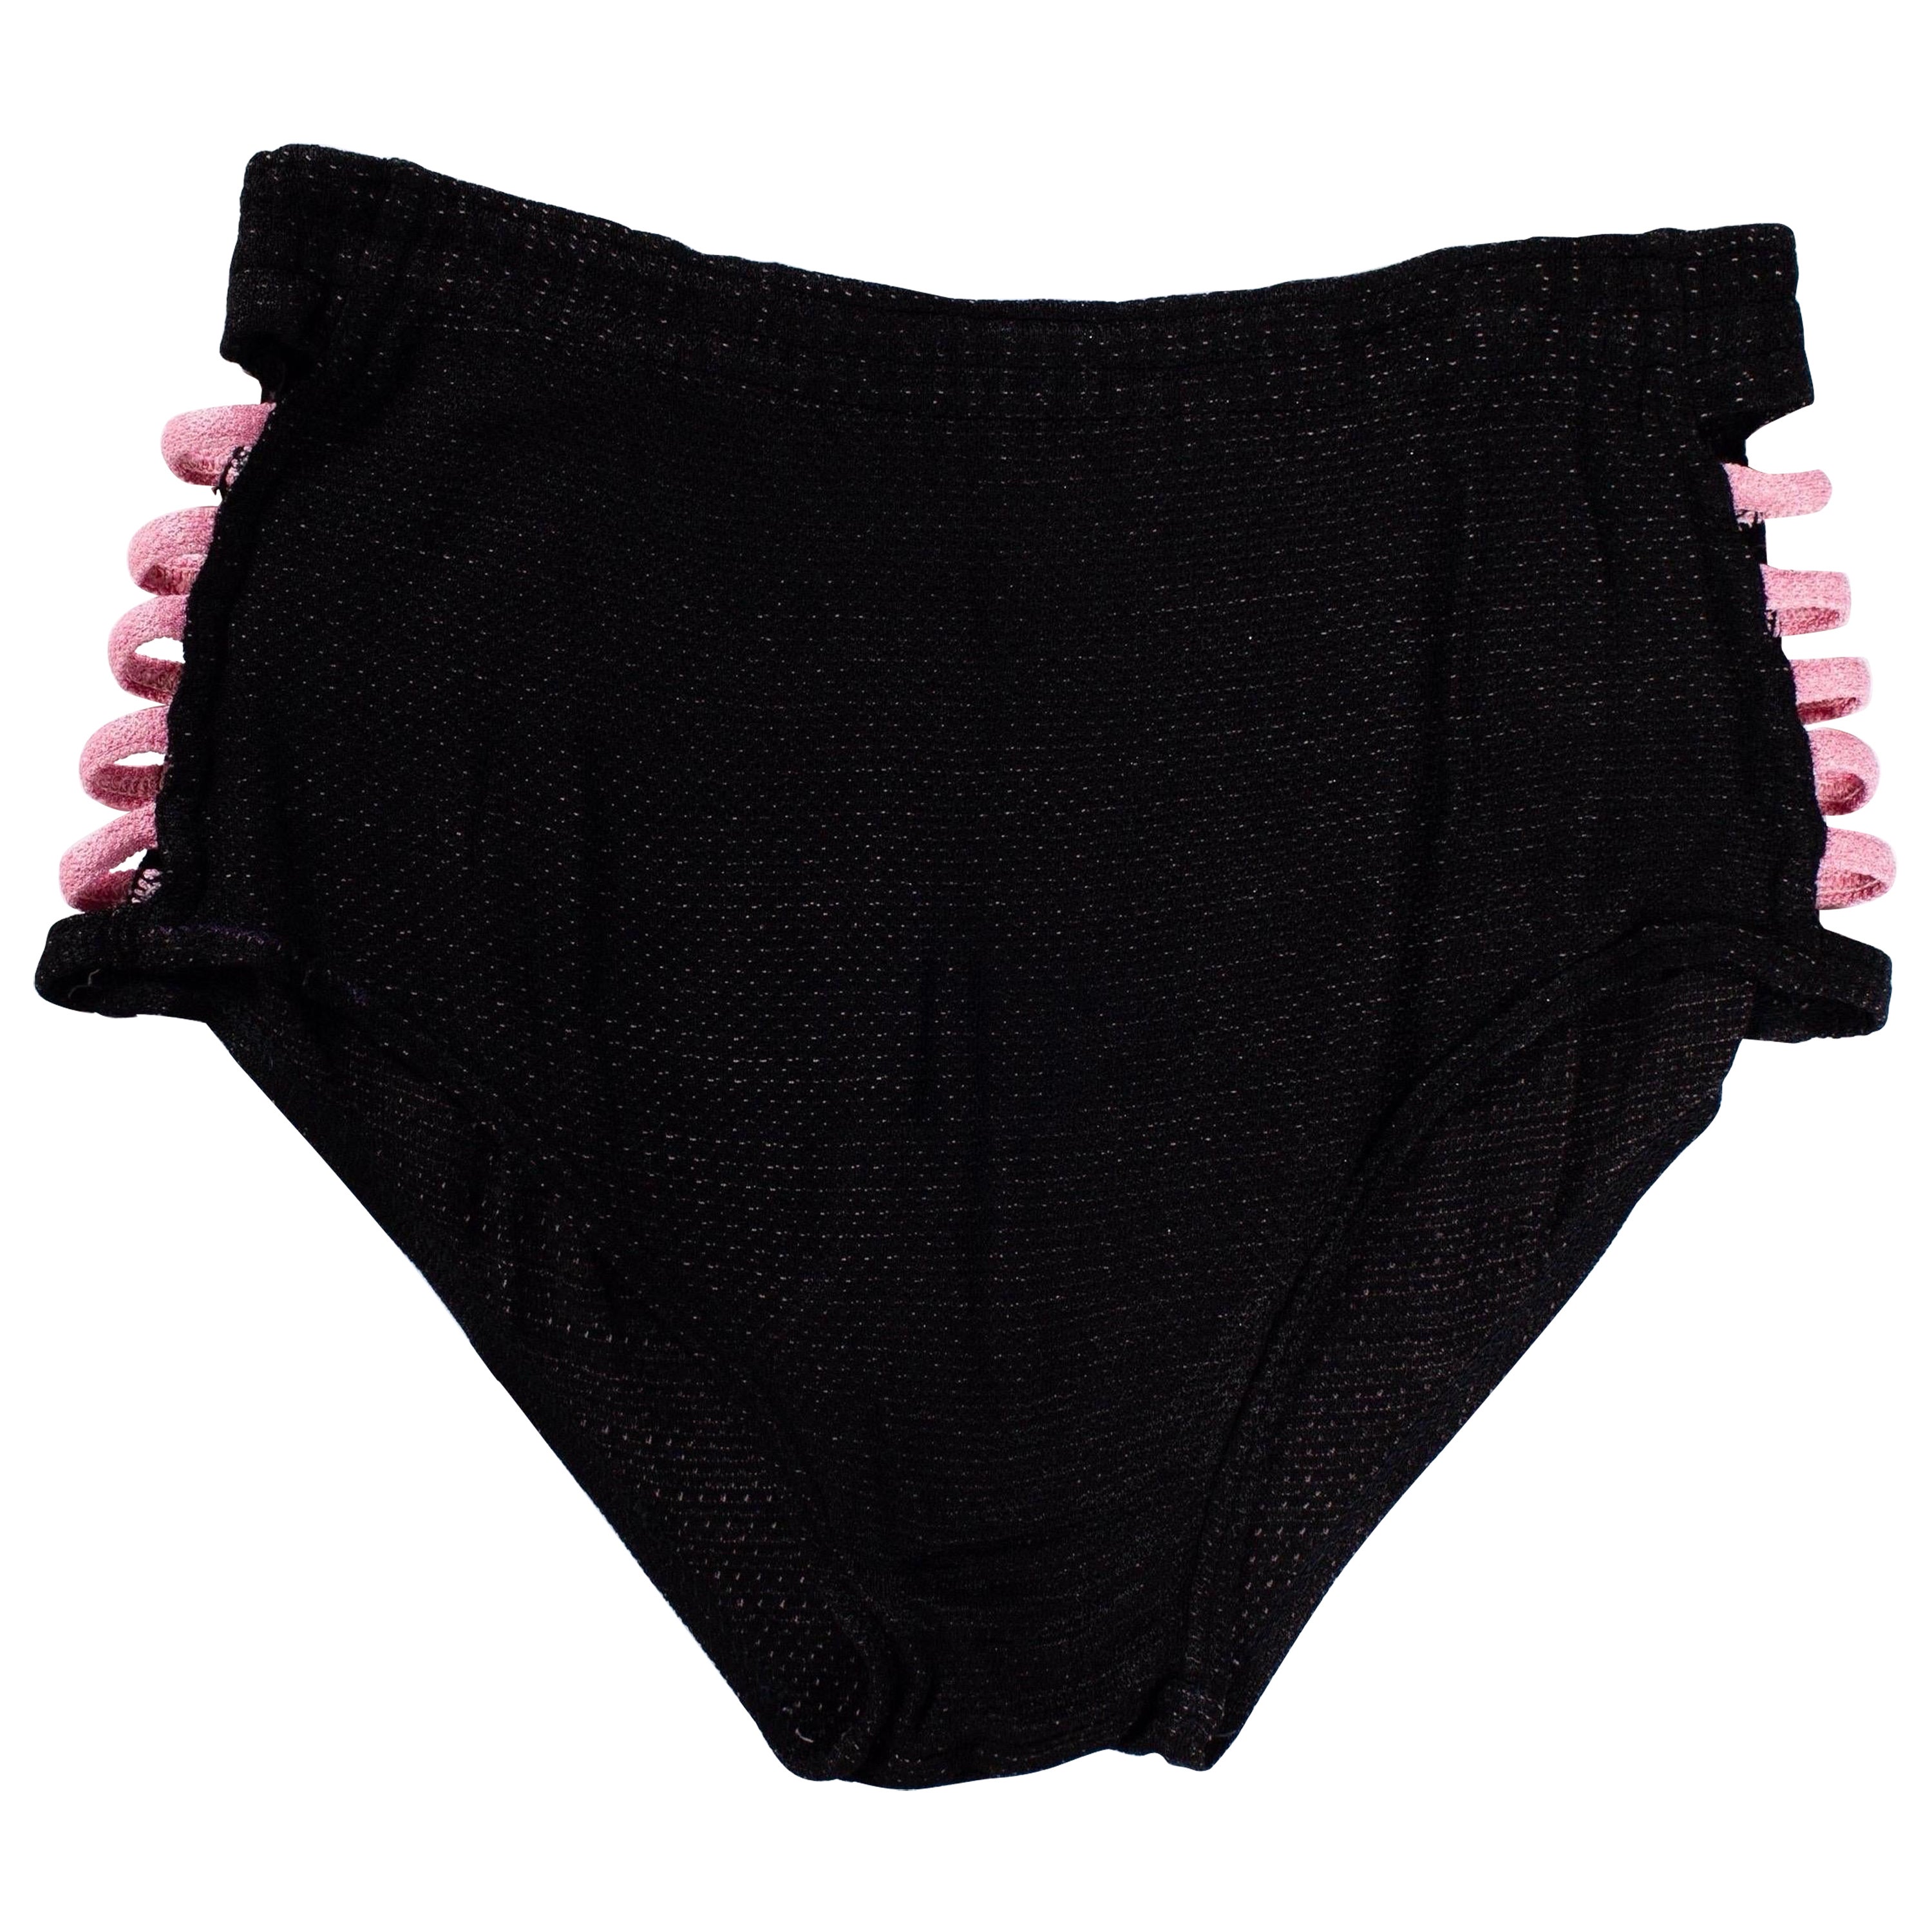 1940S Black & Pink Rayon Knit Men's Bathing Shorts With Side Cut Outs For Sale